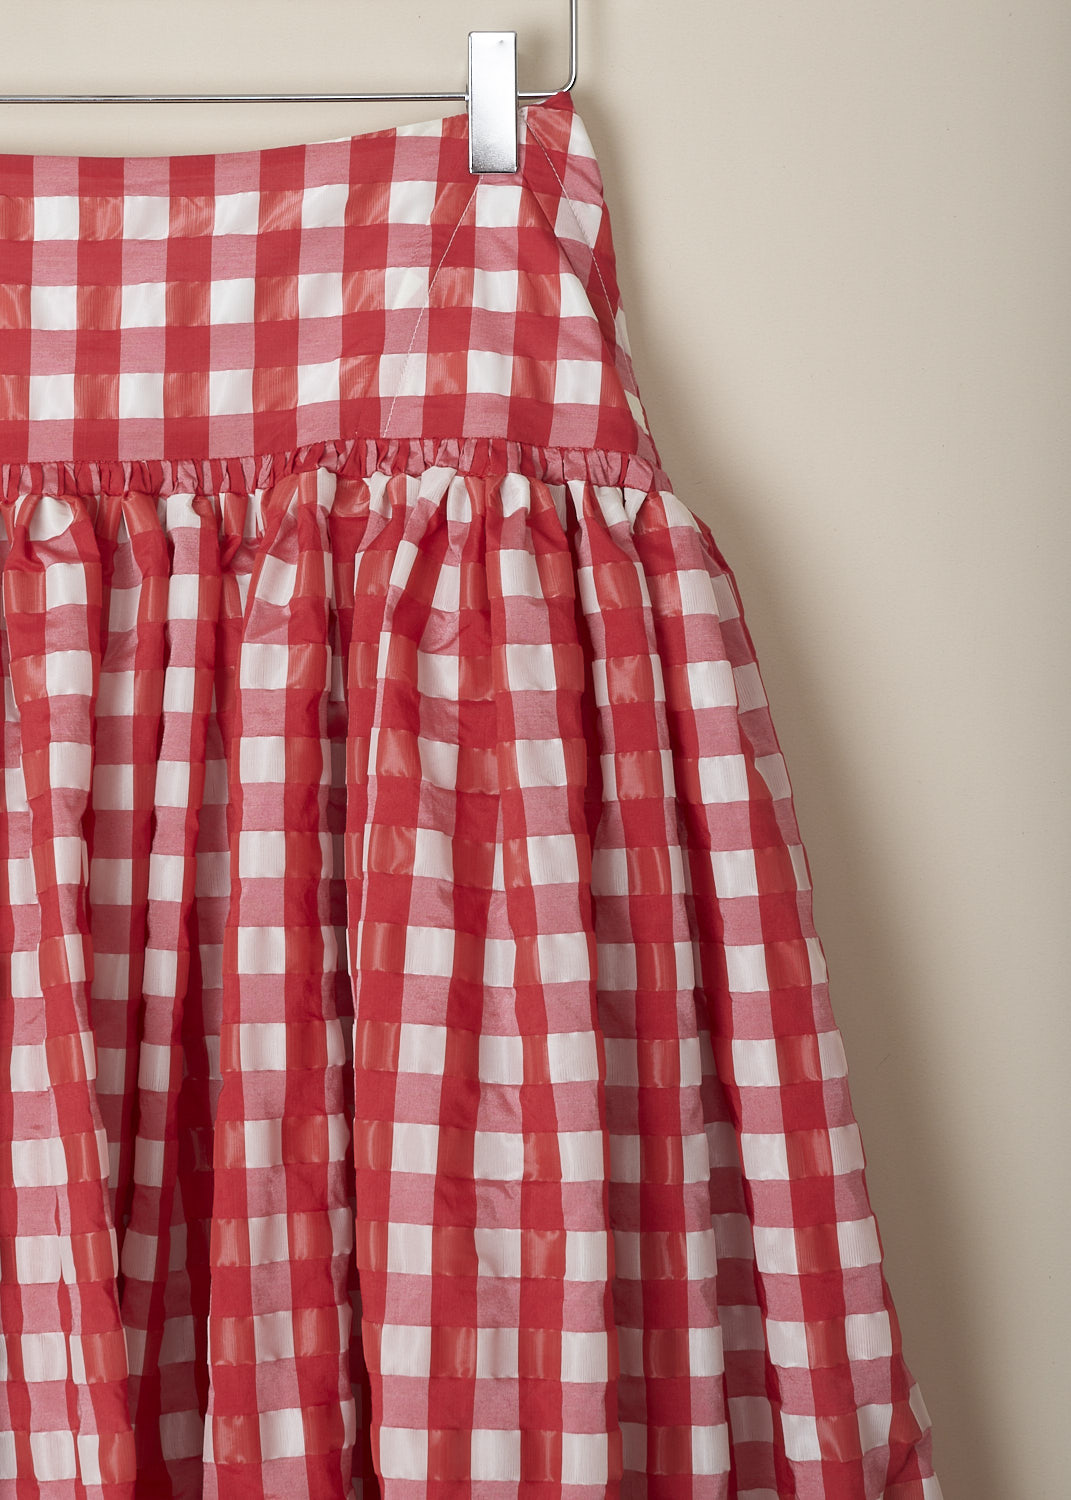 ALAÏA, RED GINGHAM MAXI SKIRT, AA9J04644T577, Red, White, Print, Detail, This high-waisted red gingham maxi skirt hugs the waist and flares out to a voluminous maxi skirt. The skirt has concealed slanted pockets. In the back, a concealed centre zip functions as the closure option. 

